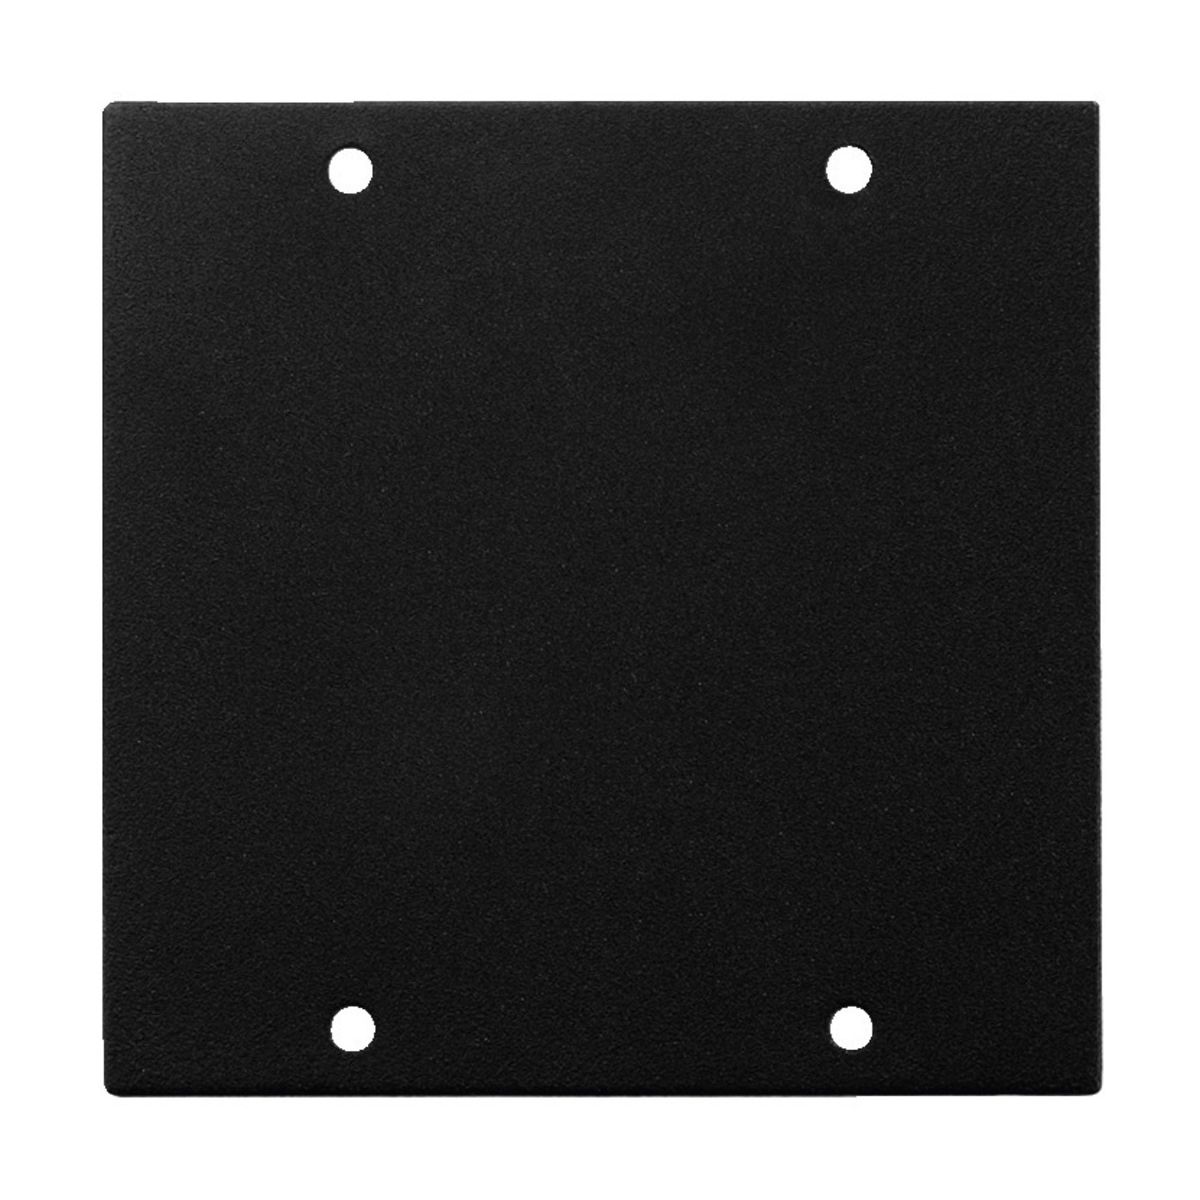 RSP-2SPACE | 2-fold segment panel for RSP-10F-0